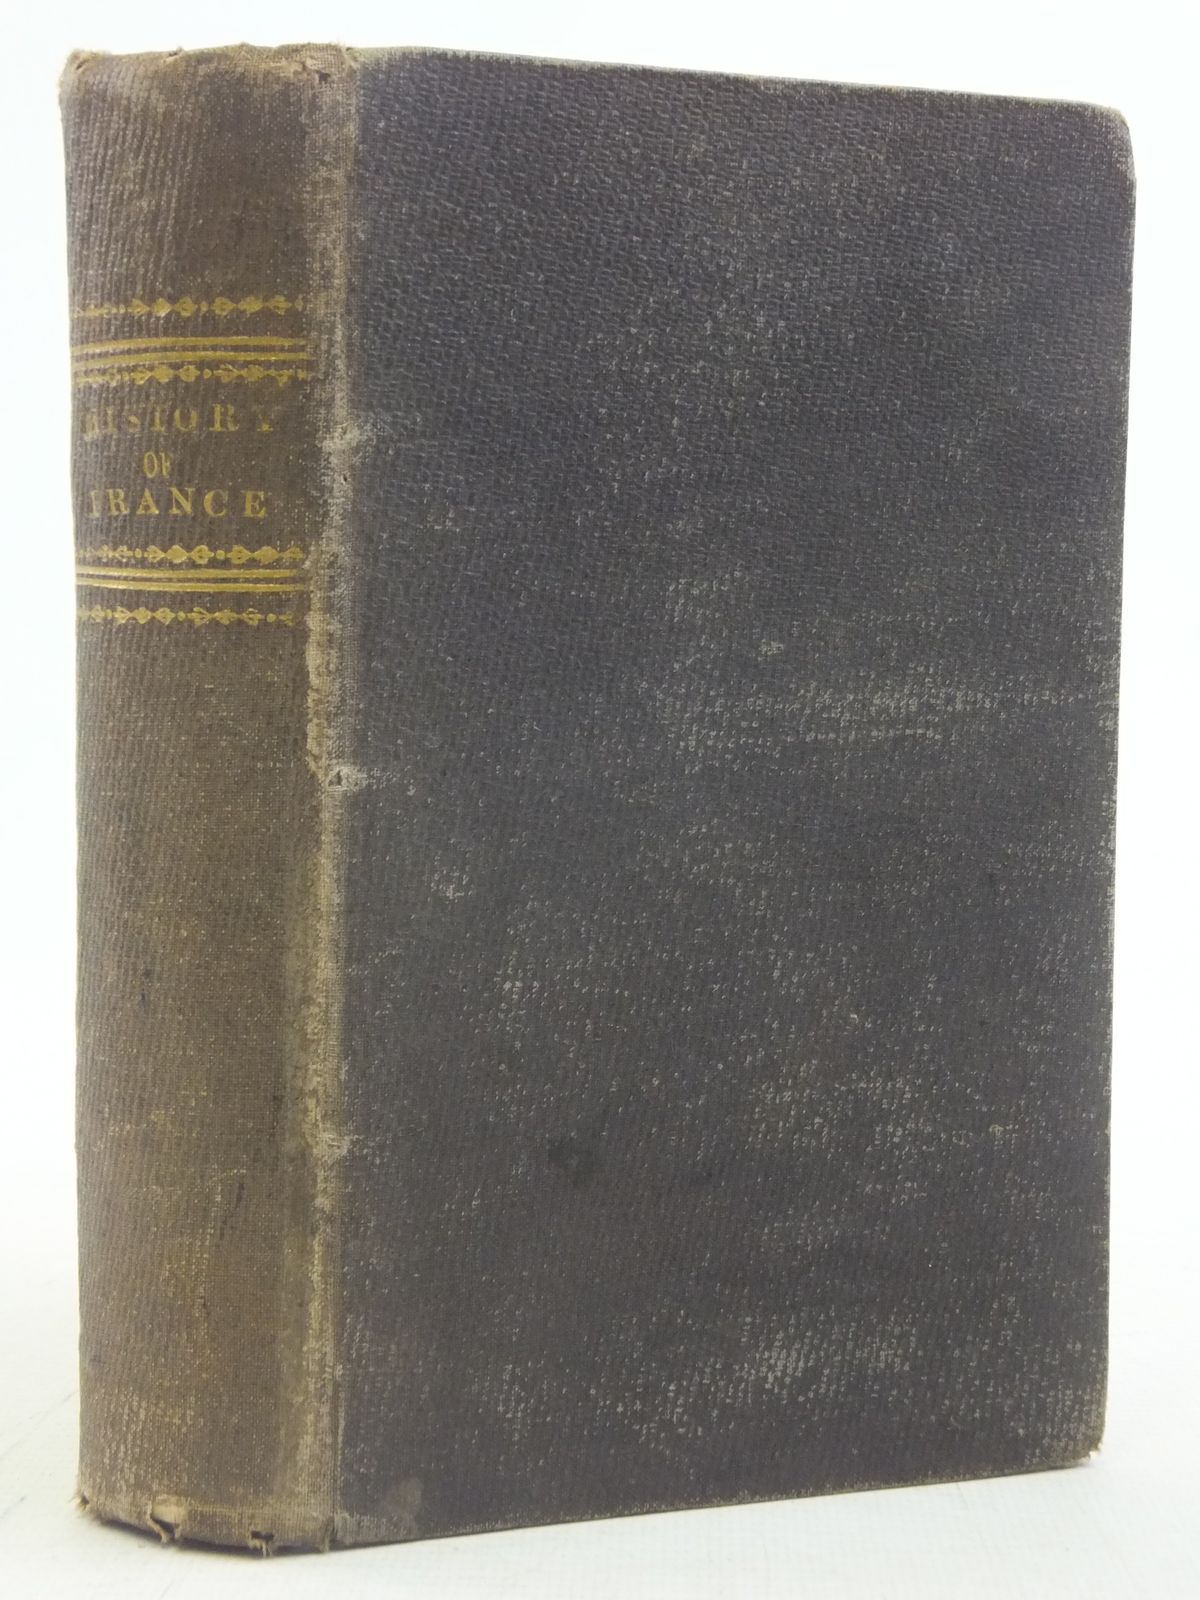 Photo of A HISTORY OF FRANCE written by Markham, Mrs. published by John Murray (STOCK CODE: 1605970)  for sale by Stella & Rose's Books